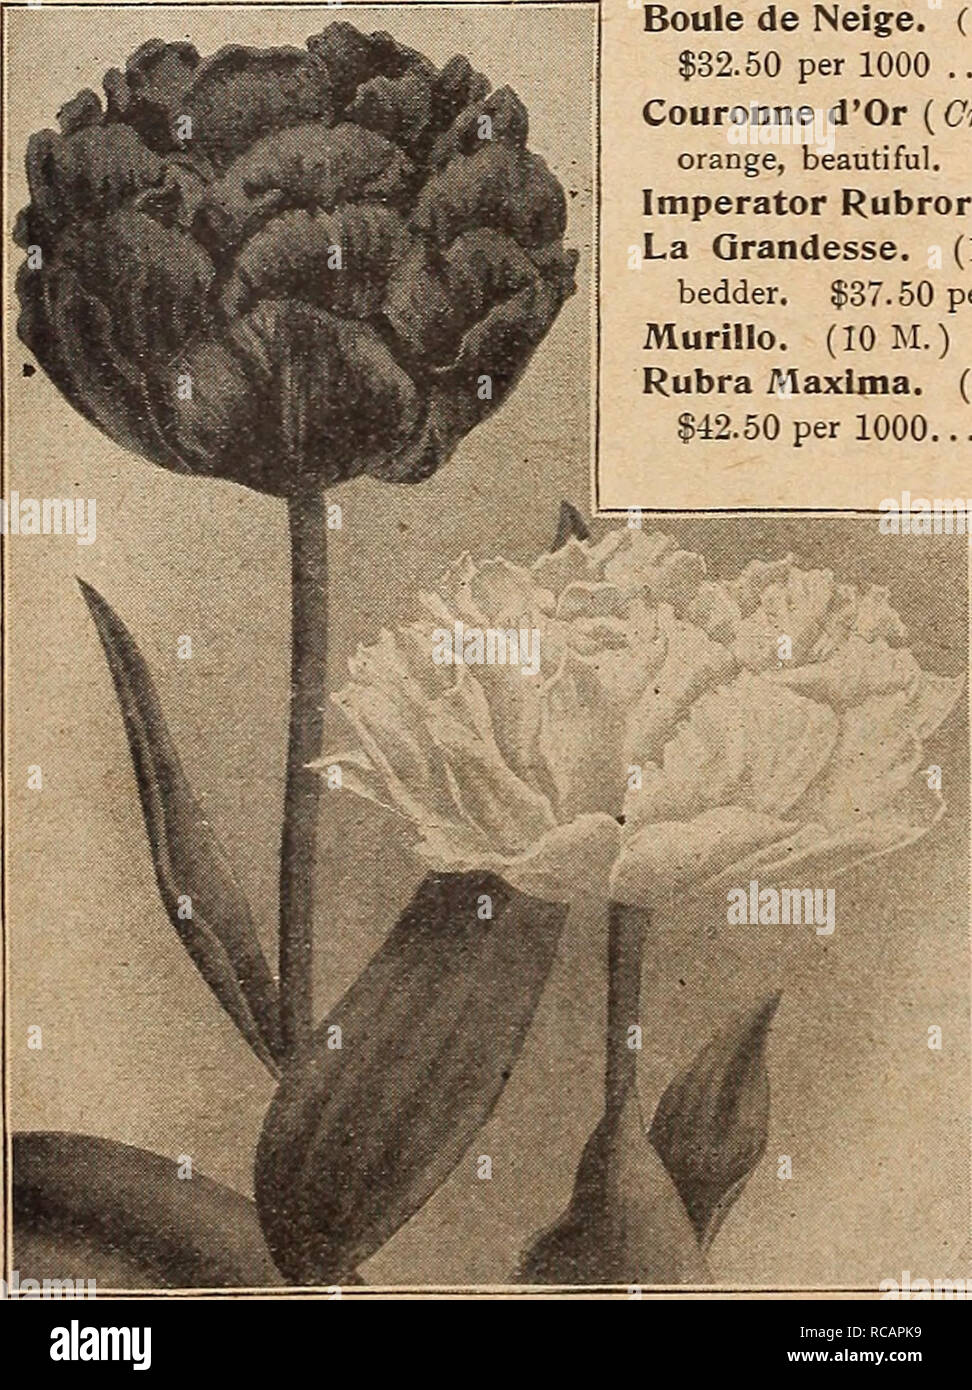 . Dreer's autumn catalogue 1919. Bulbs (Plants) Catalogs; Flowers Seeds Catalogs; Gardening Equipment and supplies Catalogs; Nurseries (Horticulture) Catalogs; Vegetables Seeds Catalogs. Old Dutch or Breeder Tulip. 75 6 00 75 6 00 55 4 00 60 4 50 4 50 $47.50 per 1000 65 5 00 Schoonoord. (10 JNI. ) Considered the finest double-white, a &quot;sport&quot; from Murillo. $32.50 per 1000 50 3 50 Tournesol. (9 M.) Scarlet, broadly edged yellow. Fine forcer. $50.00 per 1000 75 5 50 William the Third. (10 M.) Brilliant orange-scarlet, fine bedder. $42.50 per 1000 60 4 50 Collections of Double Tulips 3  Stock Photo